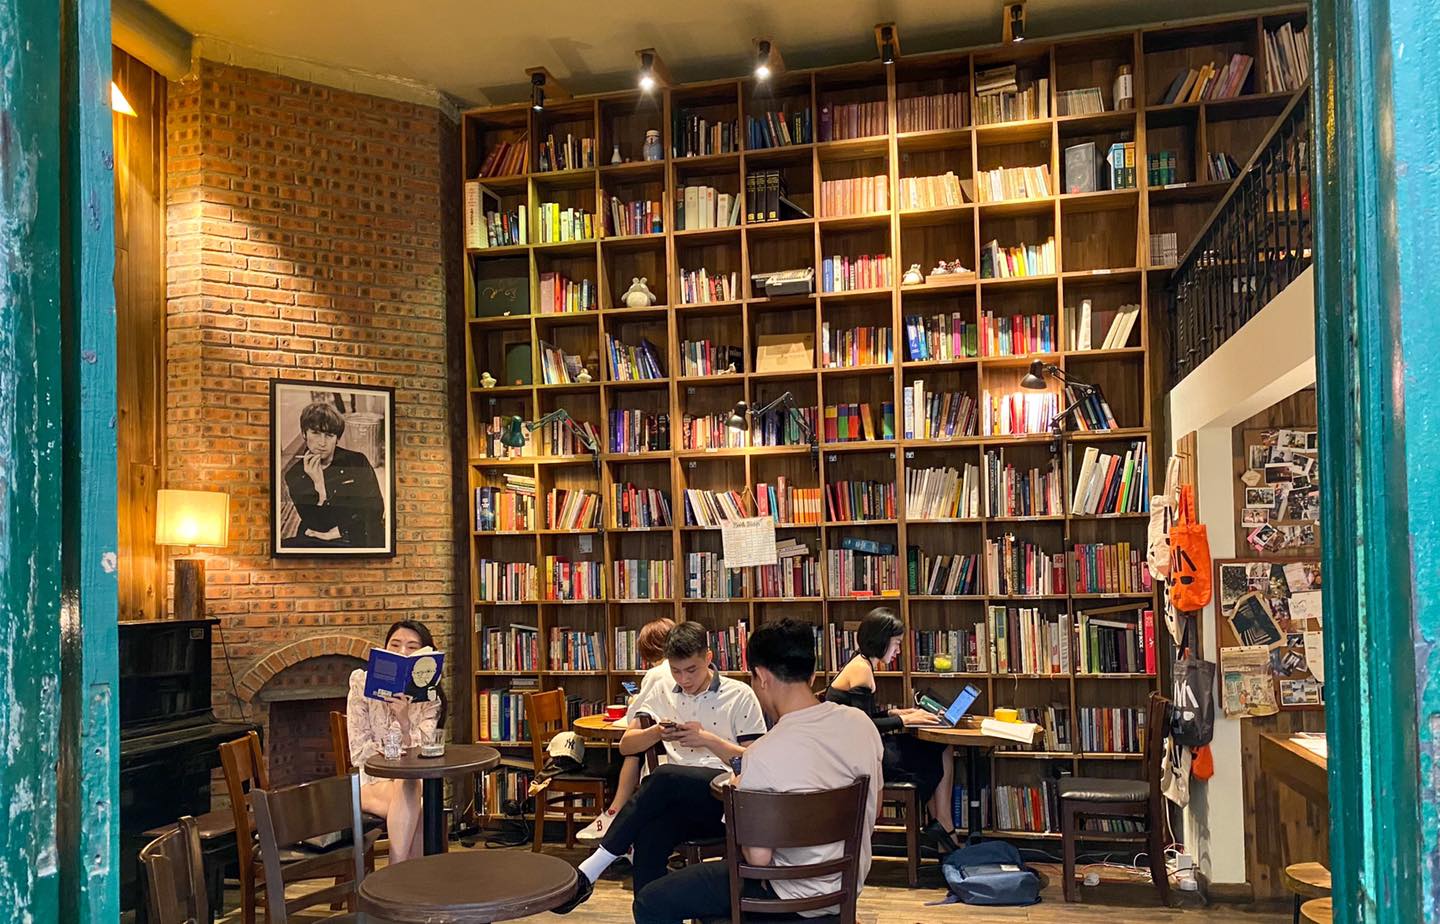 Tranquil Books & Coffee is a delightful haven for book lovers and coffee enthusiasts alike